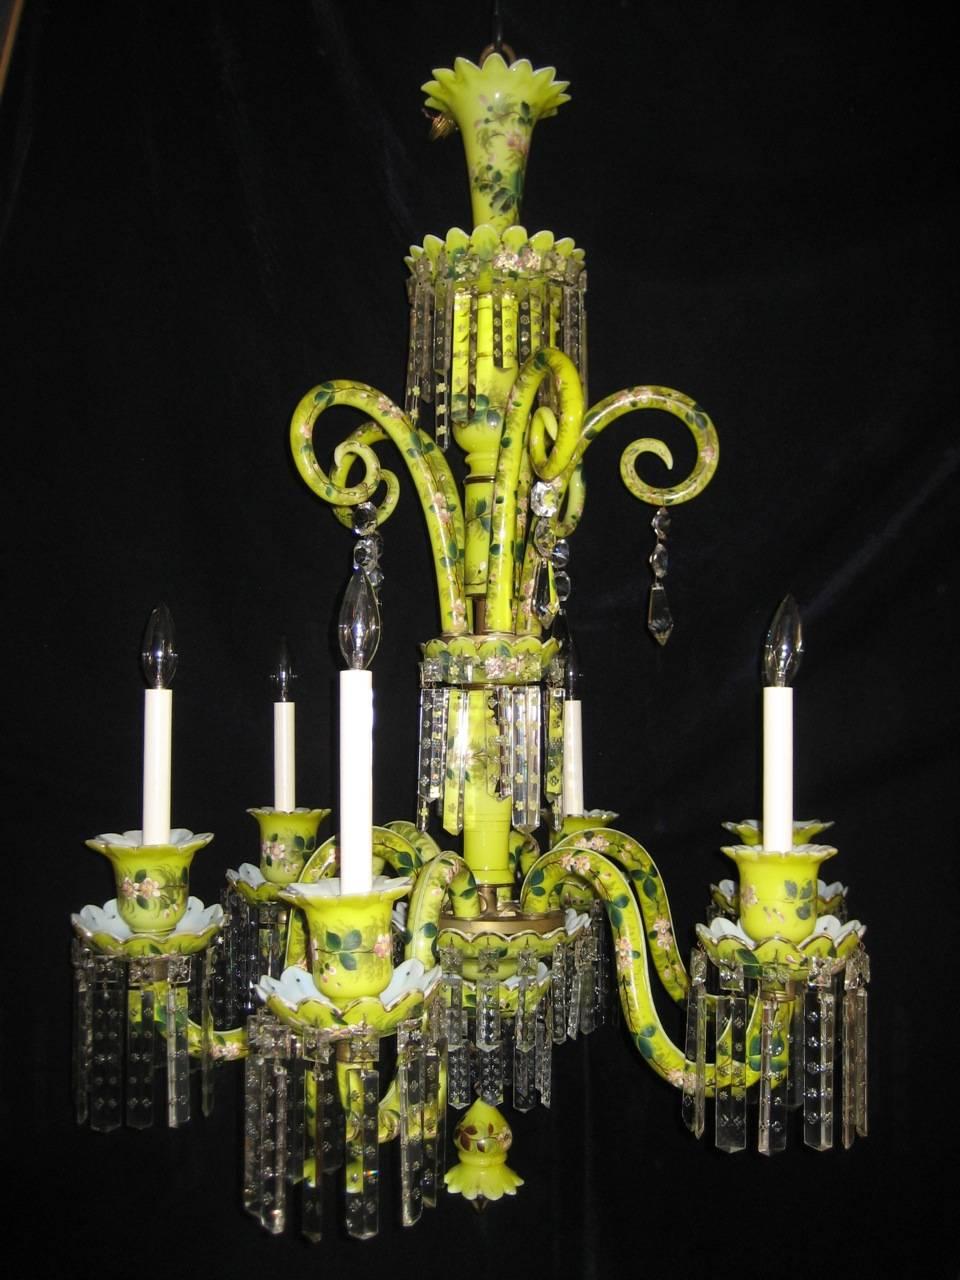 A rare antique French Louis XVI style hand enameled floral yellow opaline glass and crystal multi light chandelier of superb detail depicting pink flowers and green leaves, further adorned with cut crystal prisms.